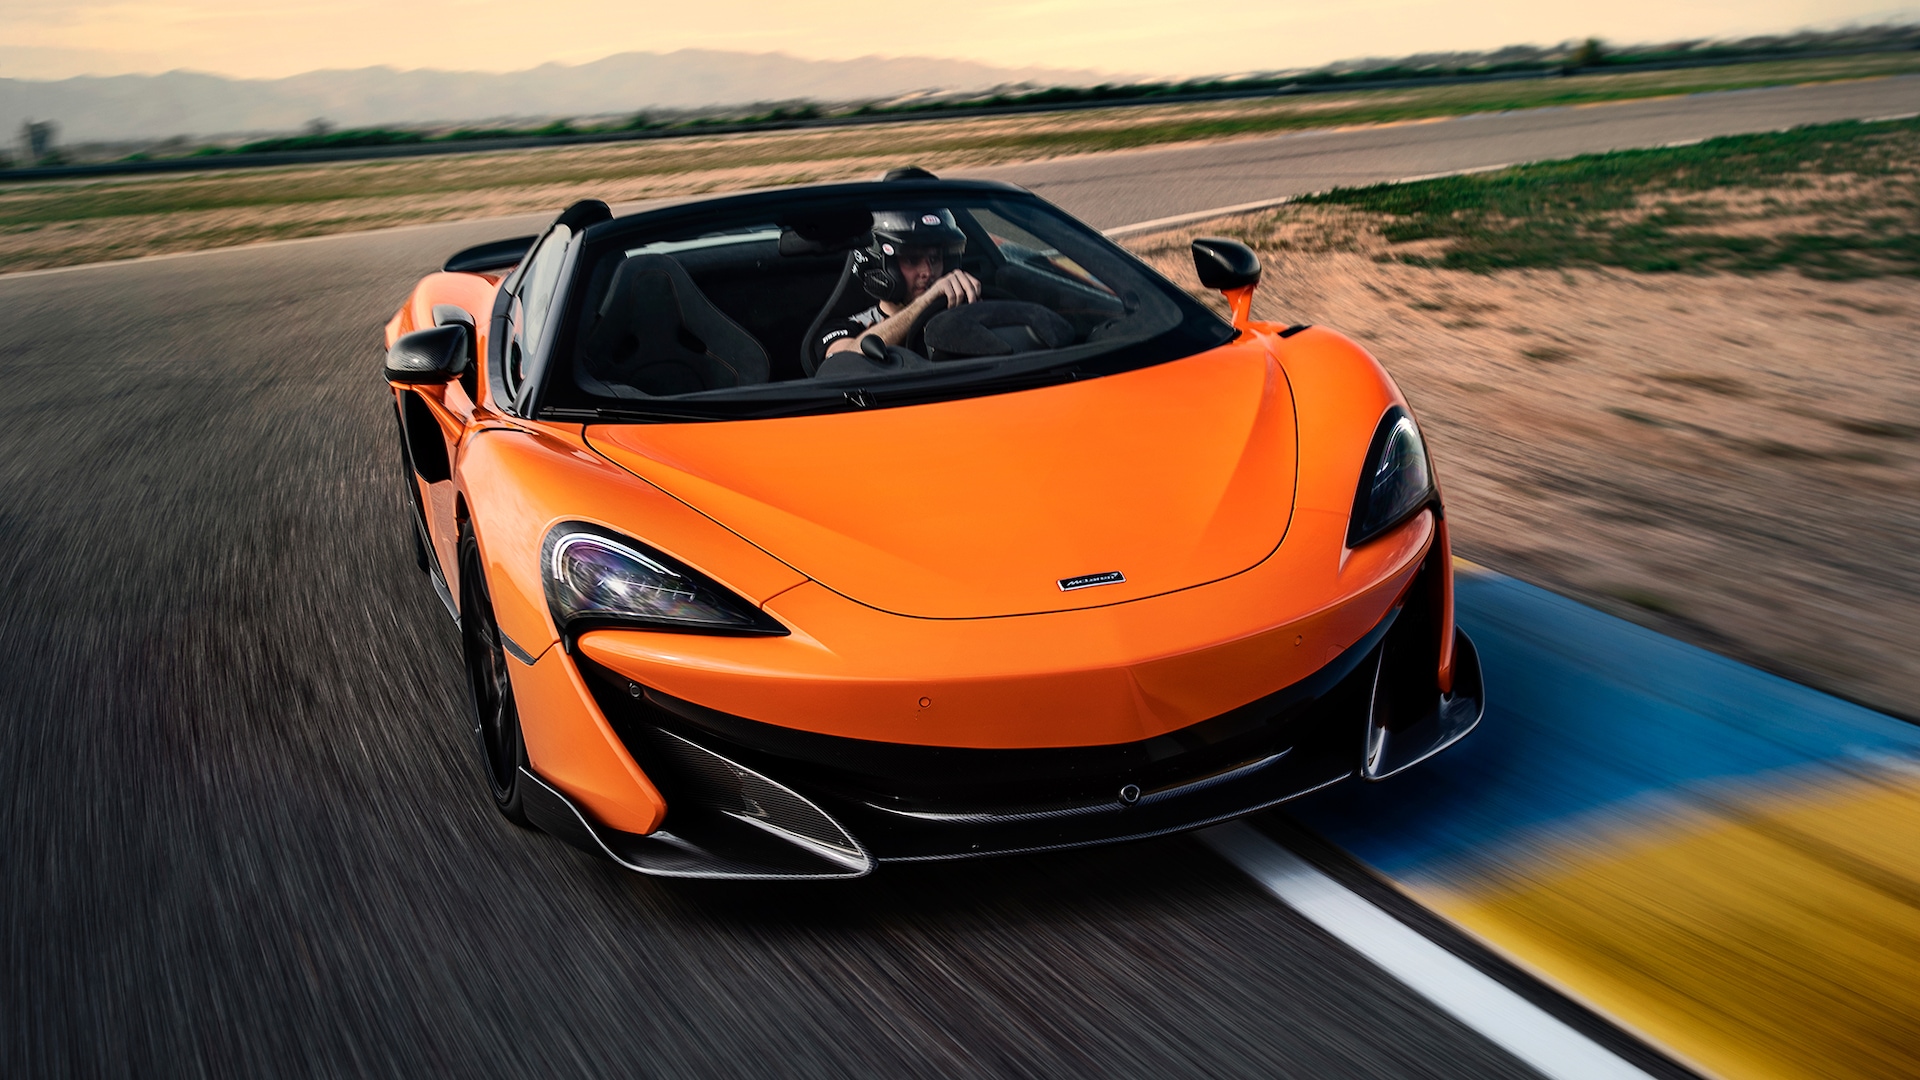 2019 McLaren 600LT Spider First Drive: Greater Than the Sum of Its Parts